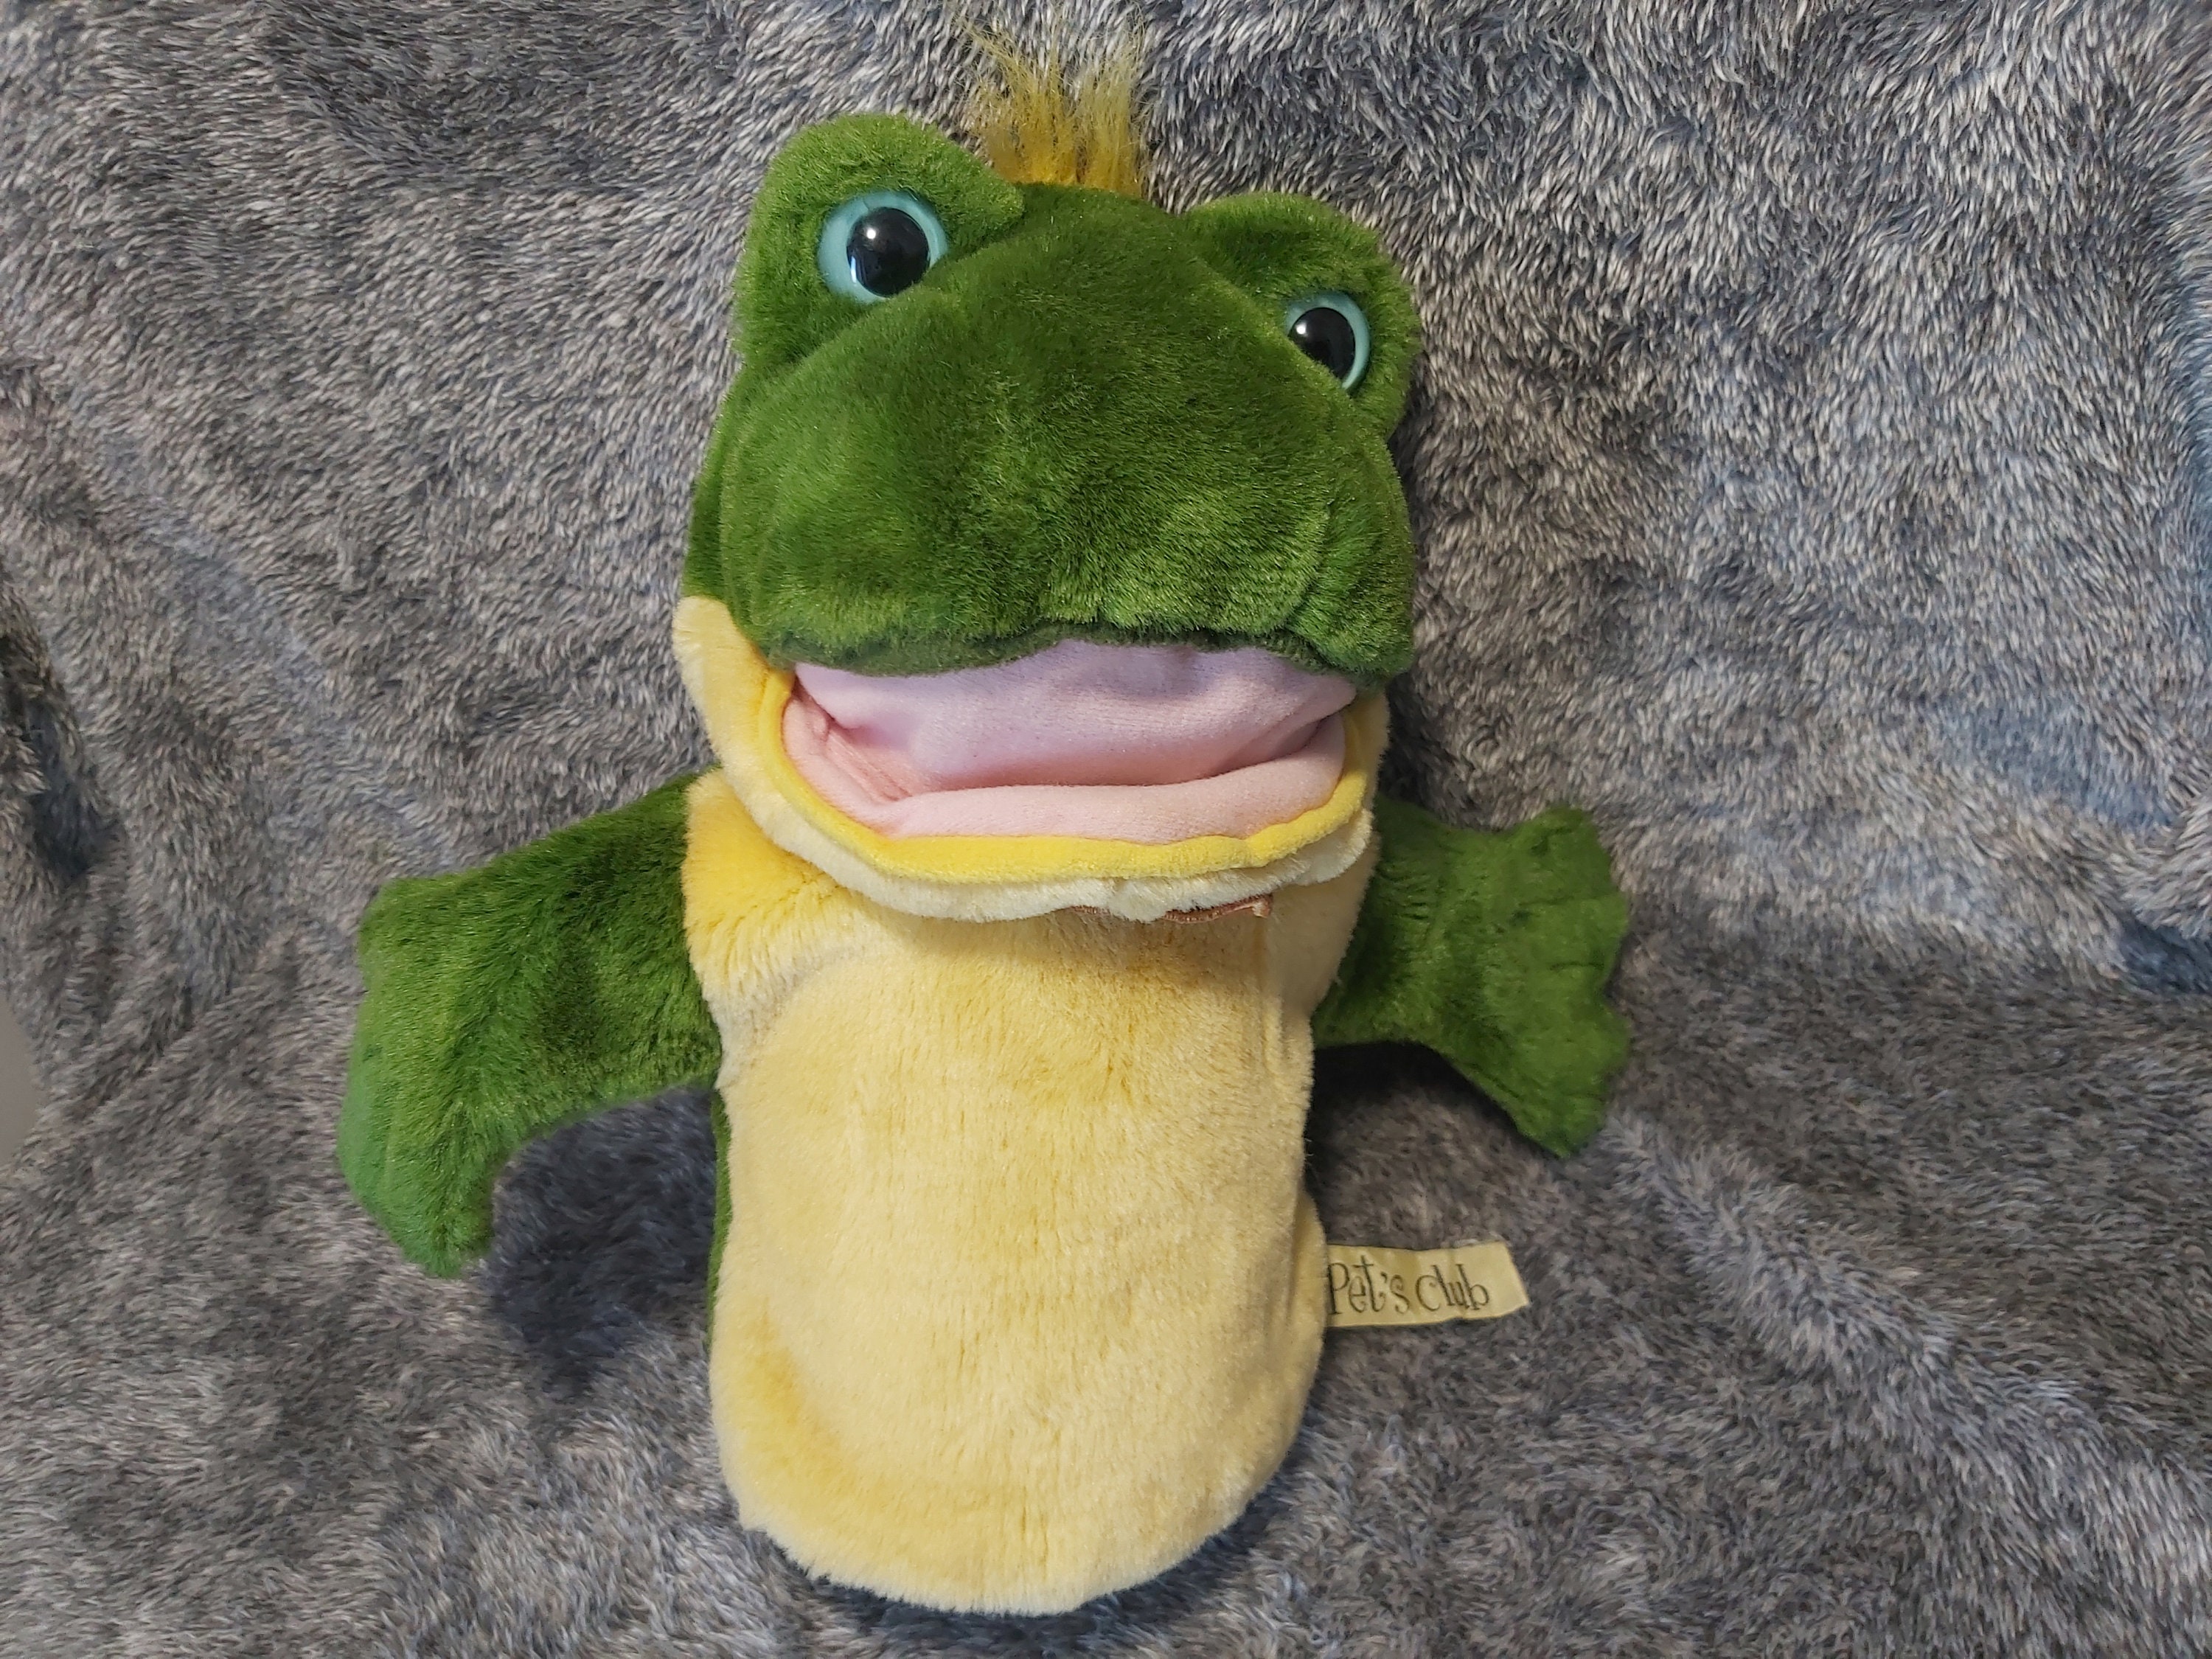 Big Mouth Animal Puppets - Complete Set at Lakeshore Learning